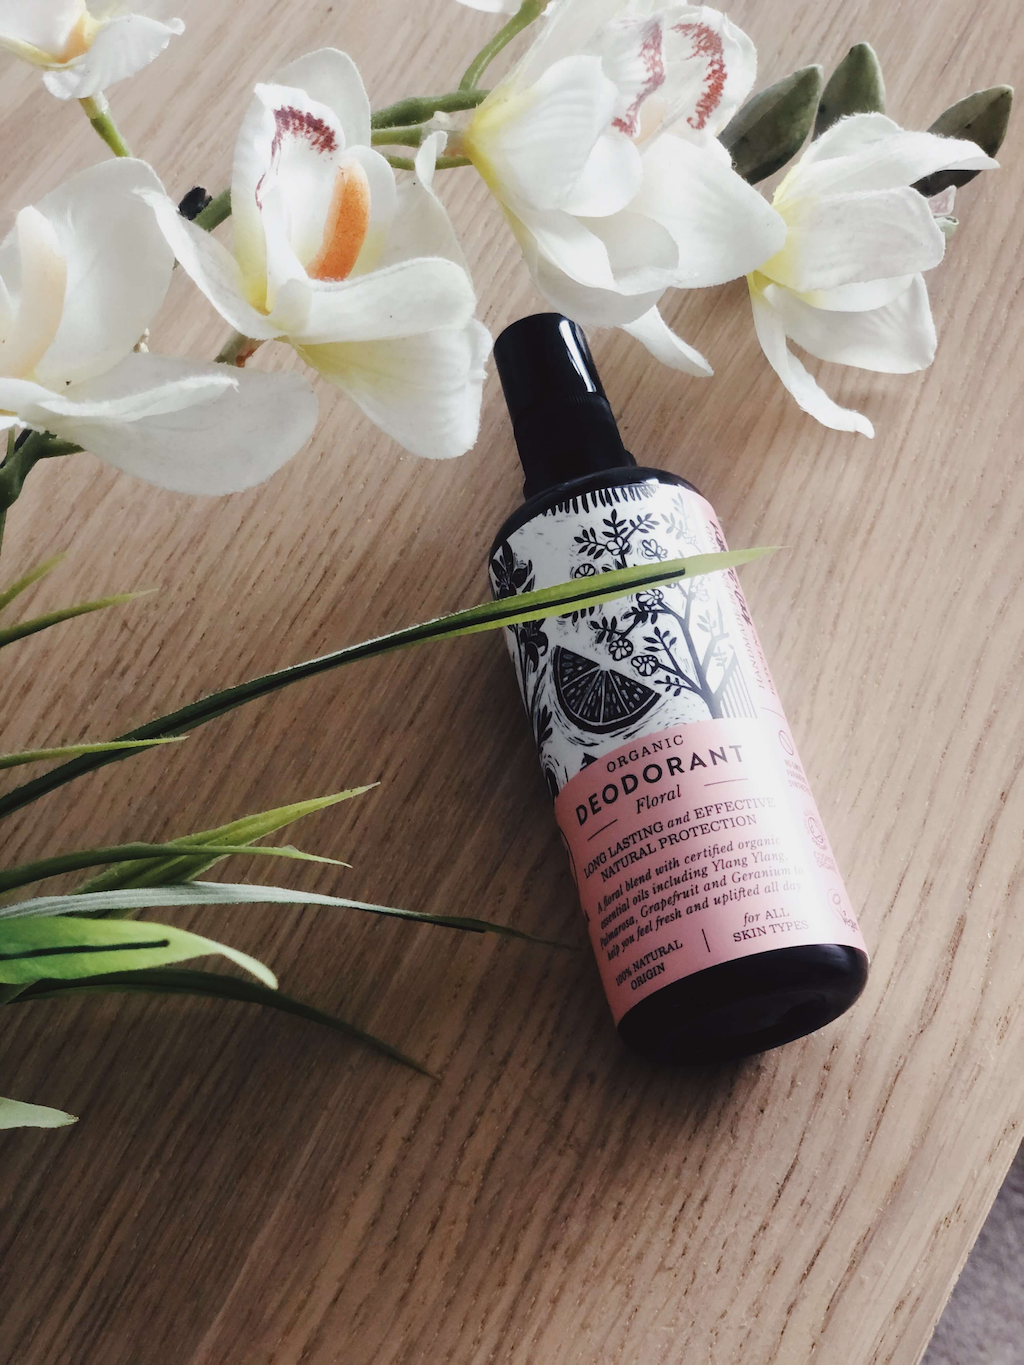 Haoma Organic Spray Deodorant. Certified vegan deodorant without bicarbonate of soda. The Floral deodorant is sitting on a wood table with white flowers draped over it.